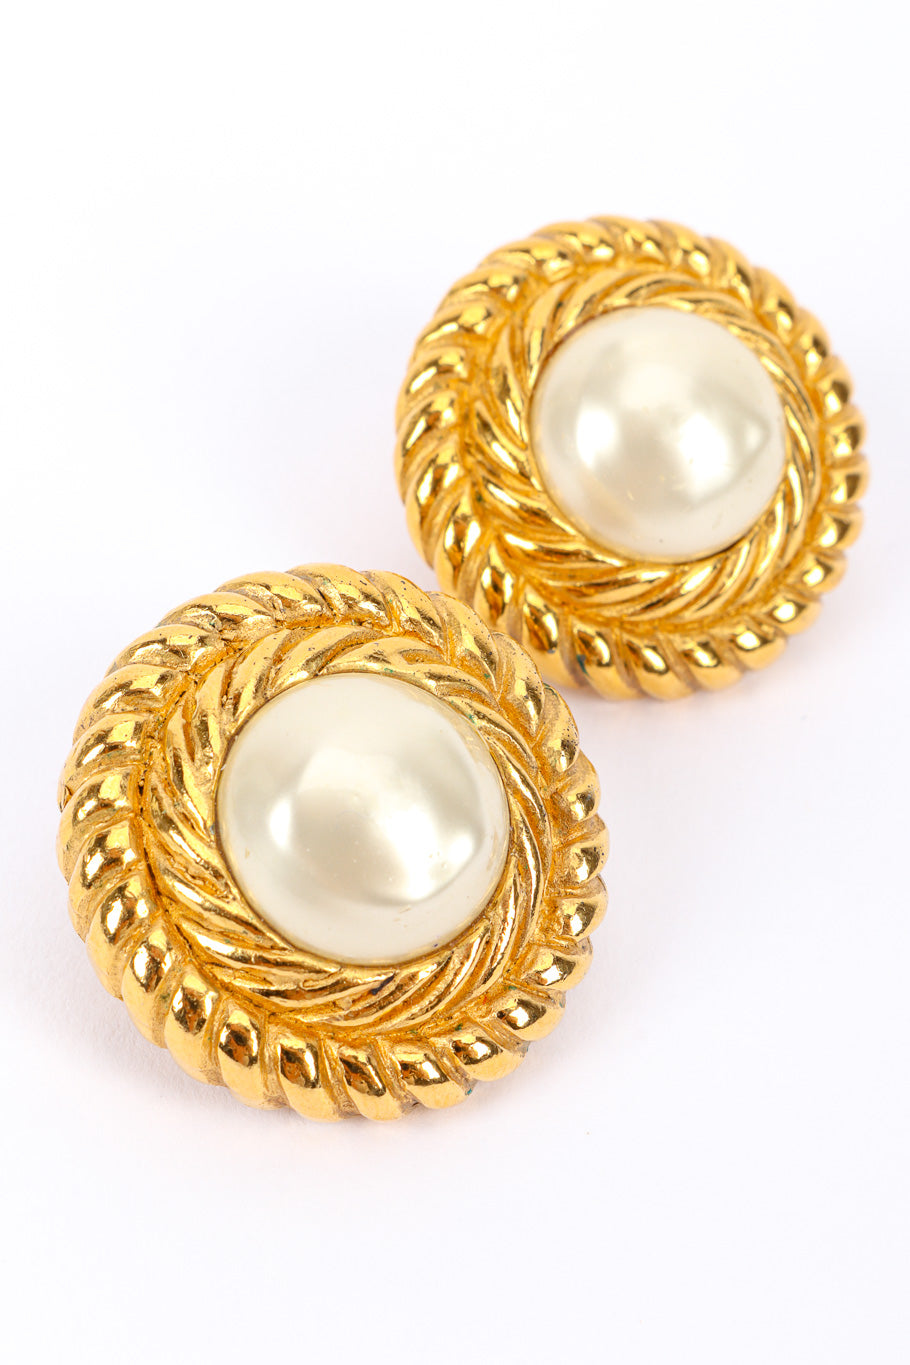 Rope Frame Pearl Earrings by Chanel on white background close from side @recessla